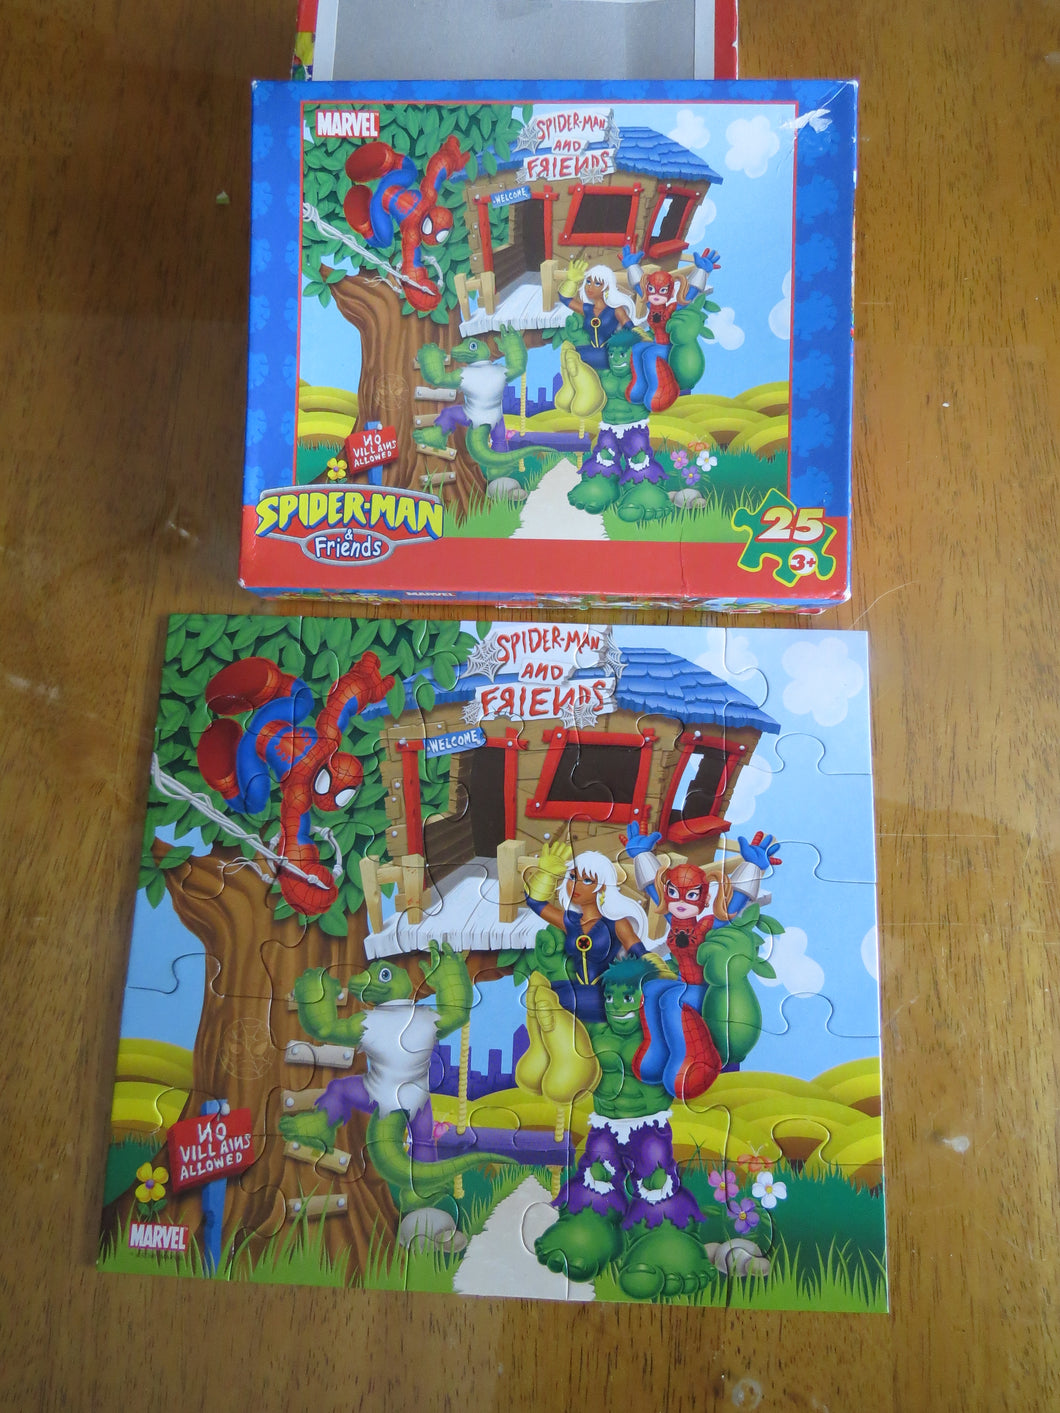 MARVEL - SPIDERMAN AND FRIENDS - 25 mcx puzzle complete